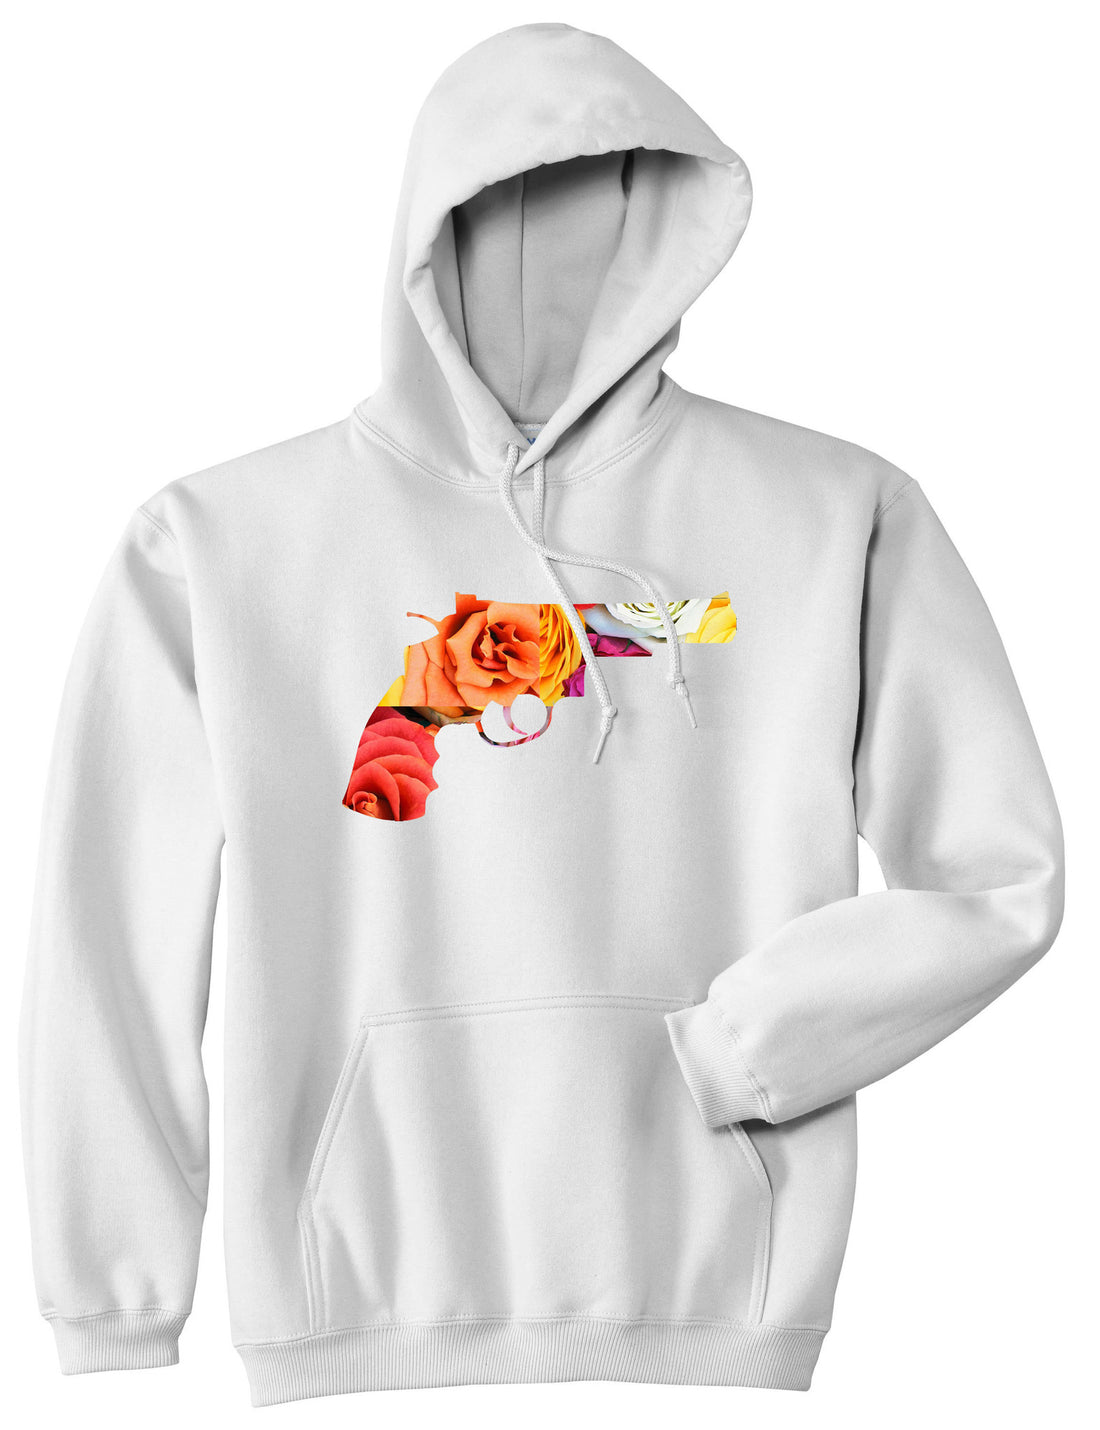 Floral Gun Flower Print Colt 45 Revolver Pullover Hoodie Hoody in White by Kings Of NY